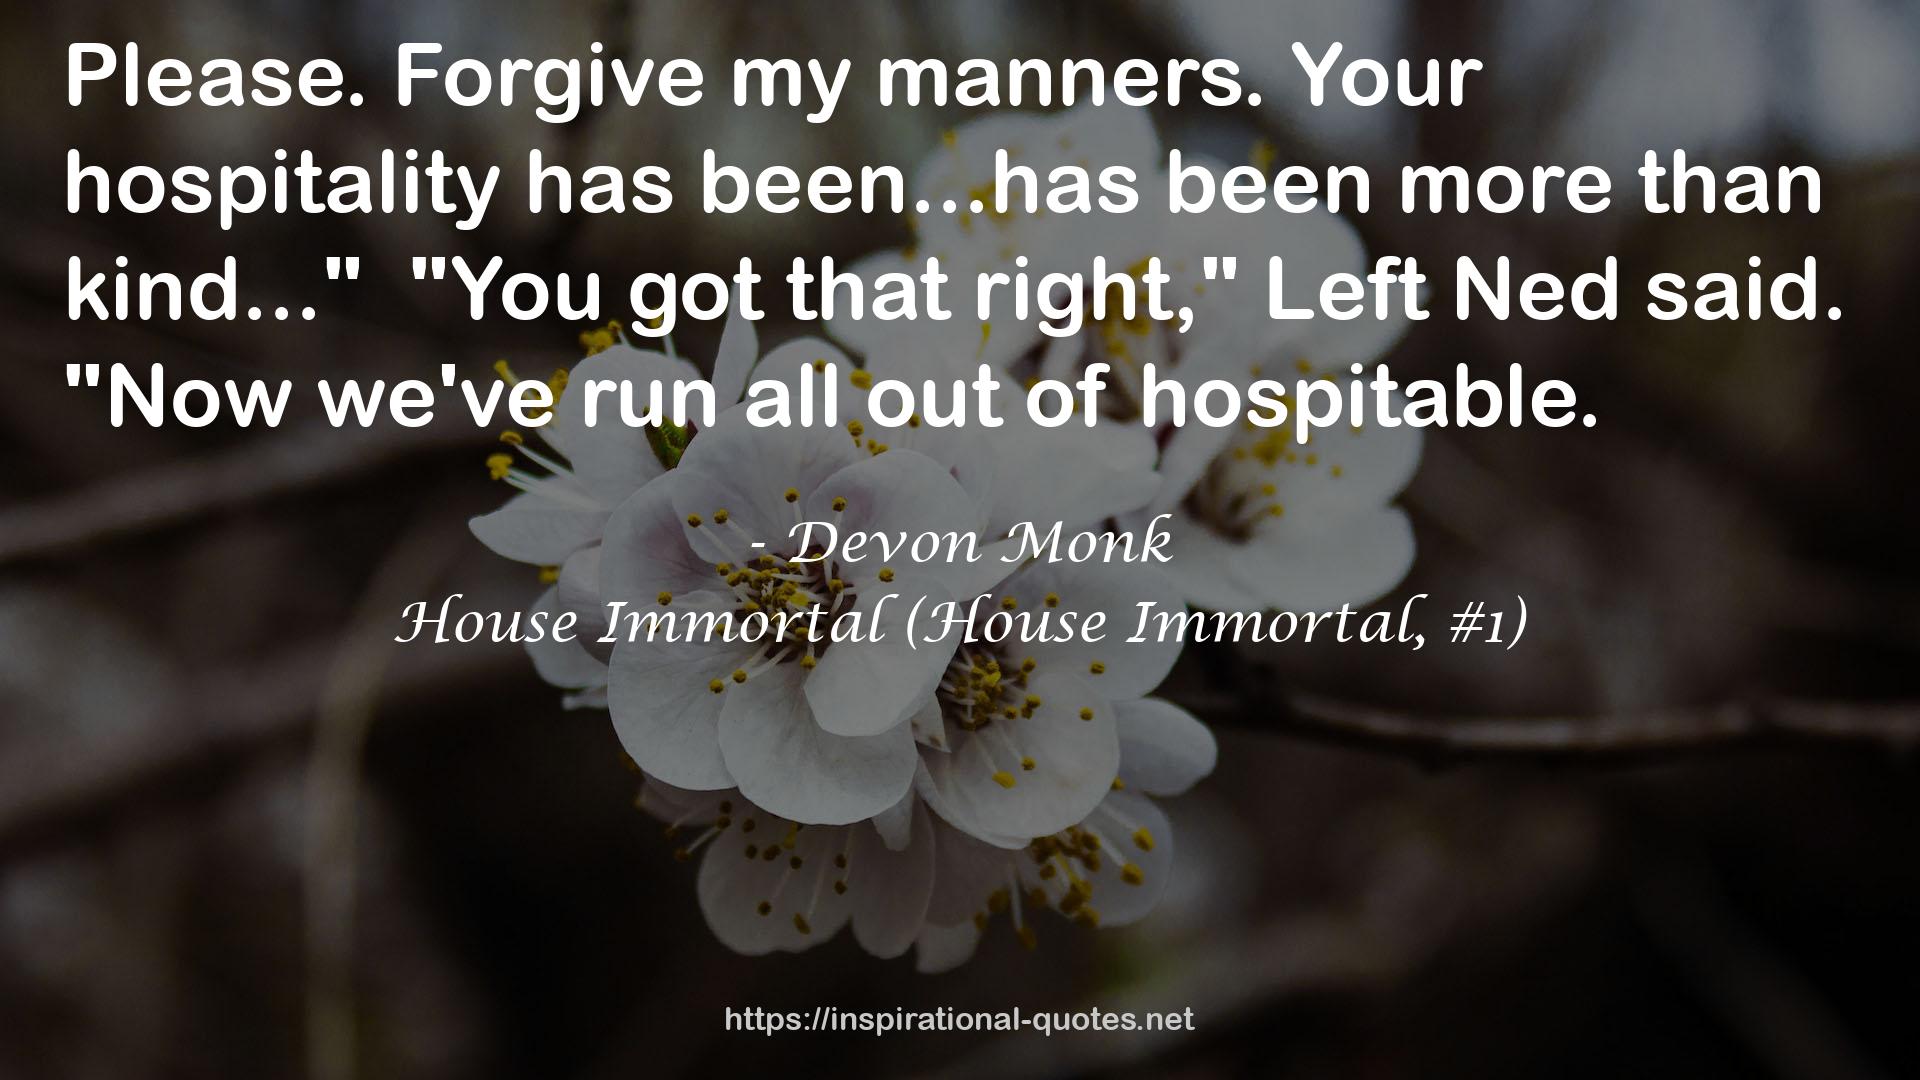 House Immortal (House Immortal, #1) QUOTES